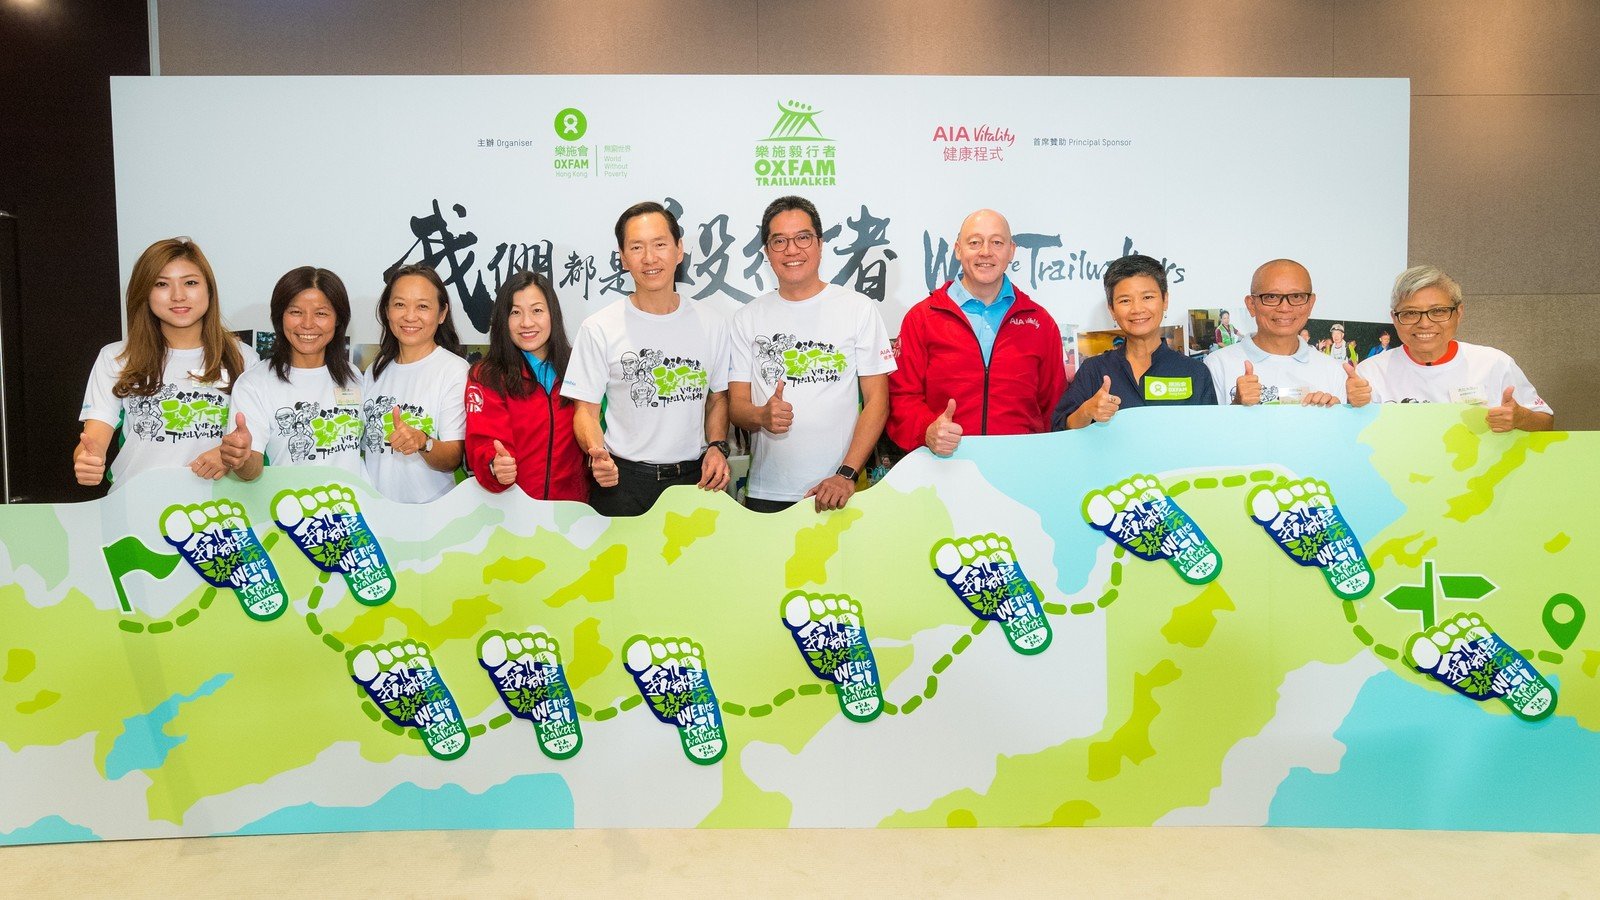 Oxfam Trailwalker 2017 Press Conference  Bernard Chan, AIA Vitality, Michael Wong Wai-Lun, and supporters from all walks of life show that anyone can be a Trailwalker